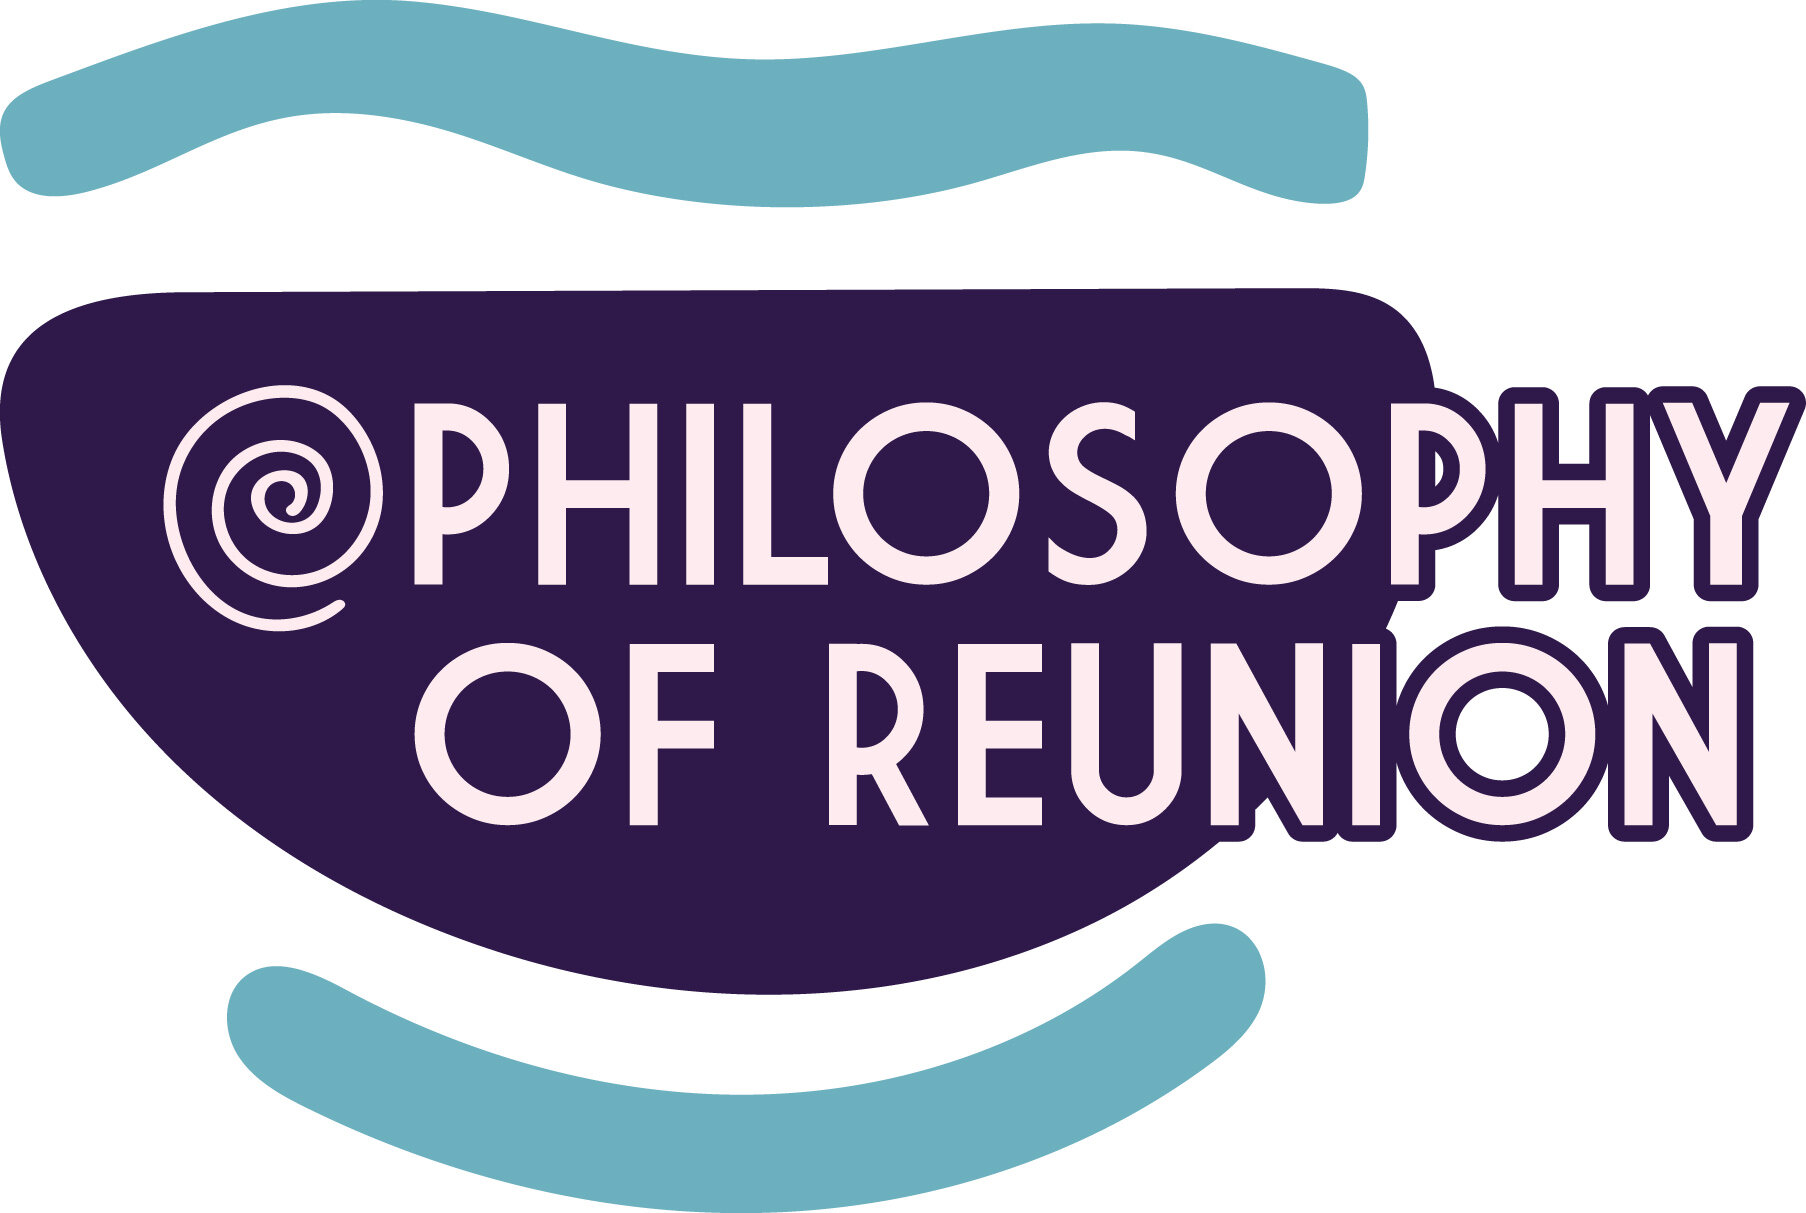 PHILOSOPHY OF REUNION - In this moment of political and global transition, the pressure to respond to the suffering in the world seems ever-mounting. For organizations, schools, governments, companies and community groups this pressure can lead to serious breakdowns in morale, health, communication, internal connectivity and external partnerships. But rarely are people offered the necessary tools to navigate and sustain themselves during moments of transition or crisis. In order to address this escalating trend, the Genesis Healing Institute designed a special set of resources. These tools are derived from a set of unified wisdom called the “Philosophy of Reunion”.